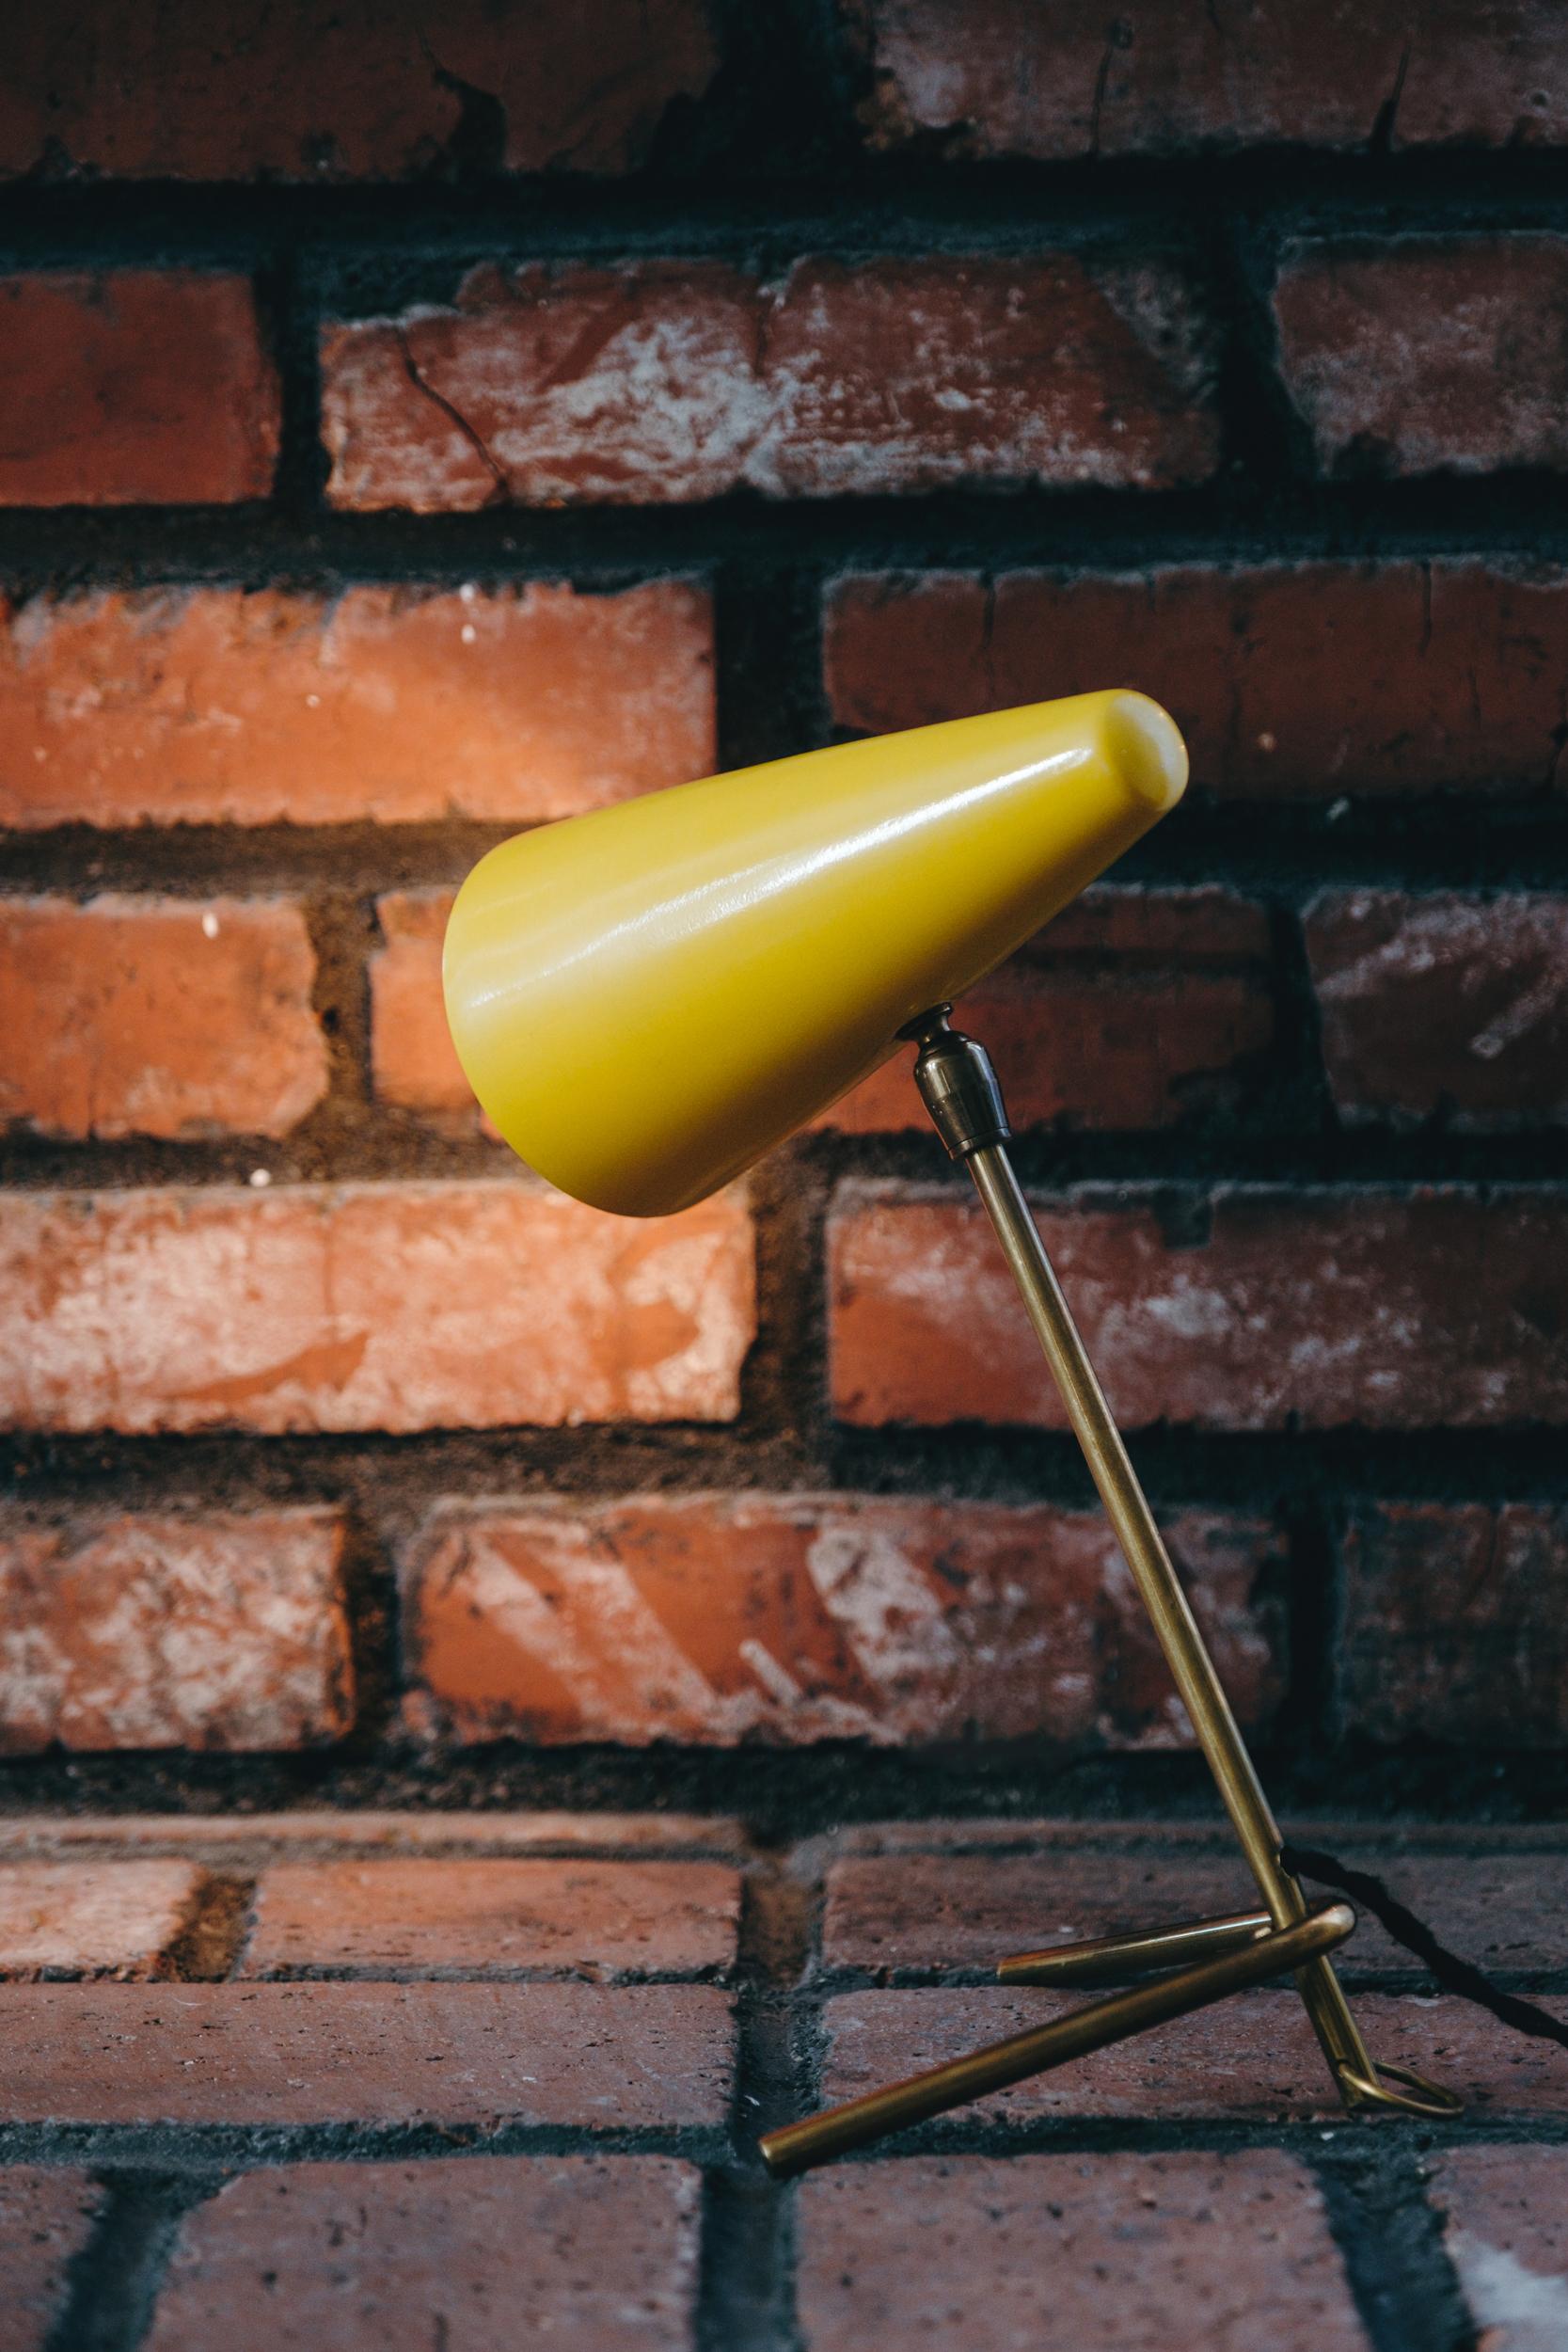 1950s Stilux Milano yellow conical table lamp. This quintessentially midcentury Italian table lamp is executed in a conical yellow painted metal shade mounted on a patinated brass arm and V-shaped legs in very good vintage condition.

Stilux was